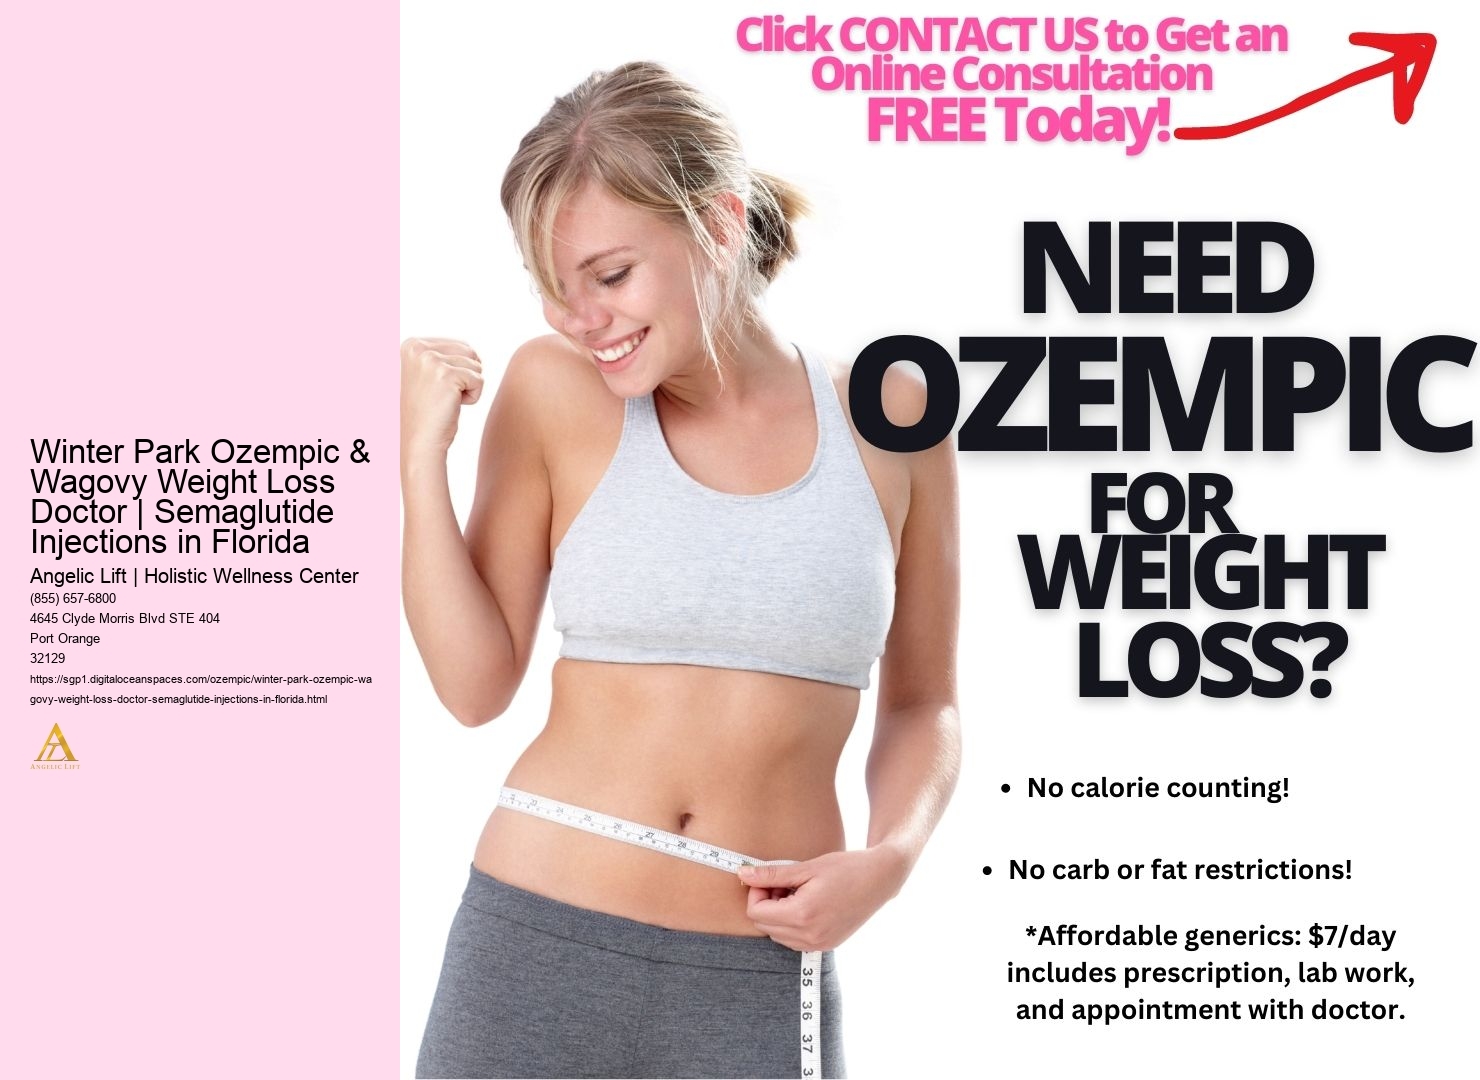 Winter Park Ozempic & Wagovy Weight Loss Doctor | Semaglutide Injections in Florida